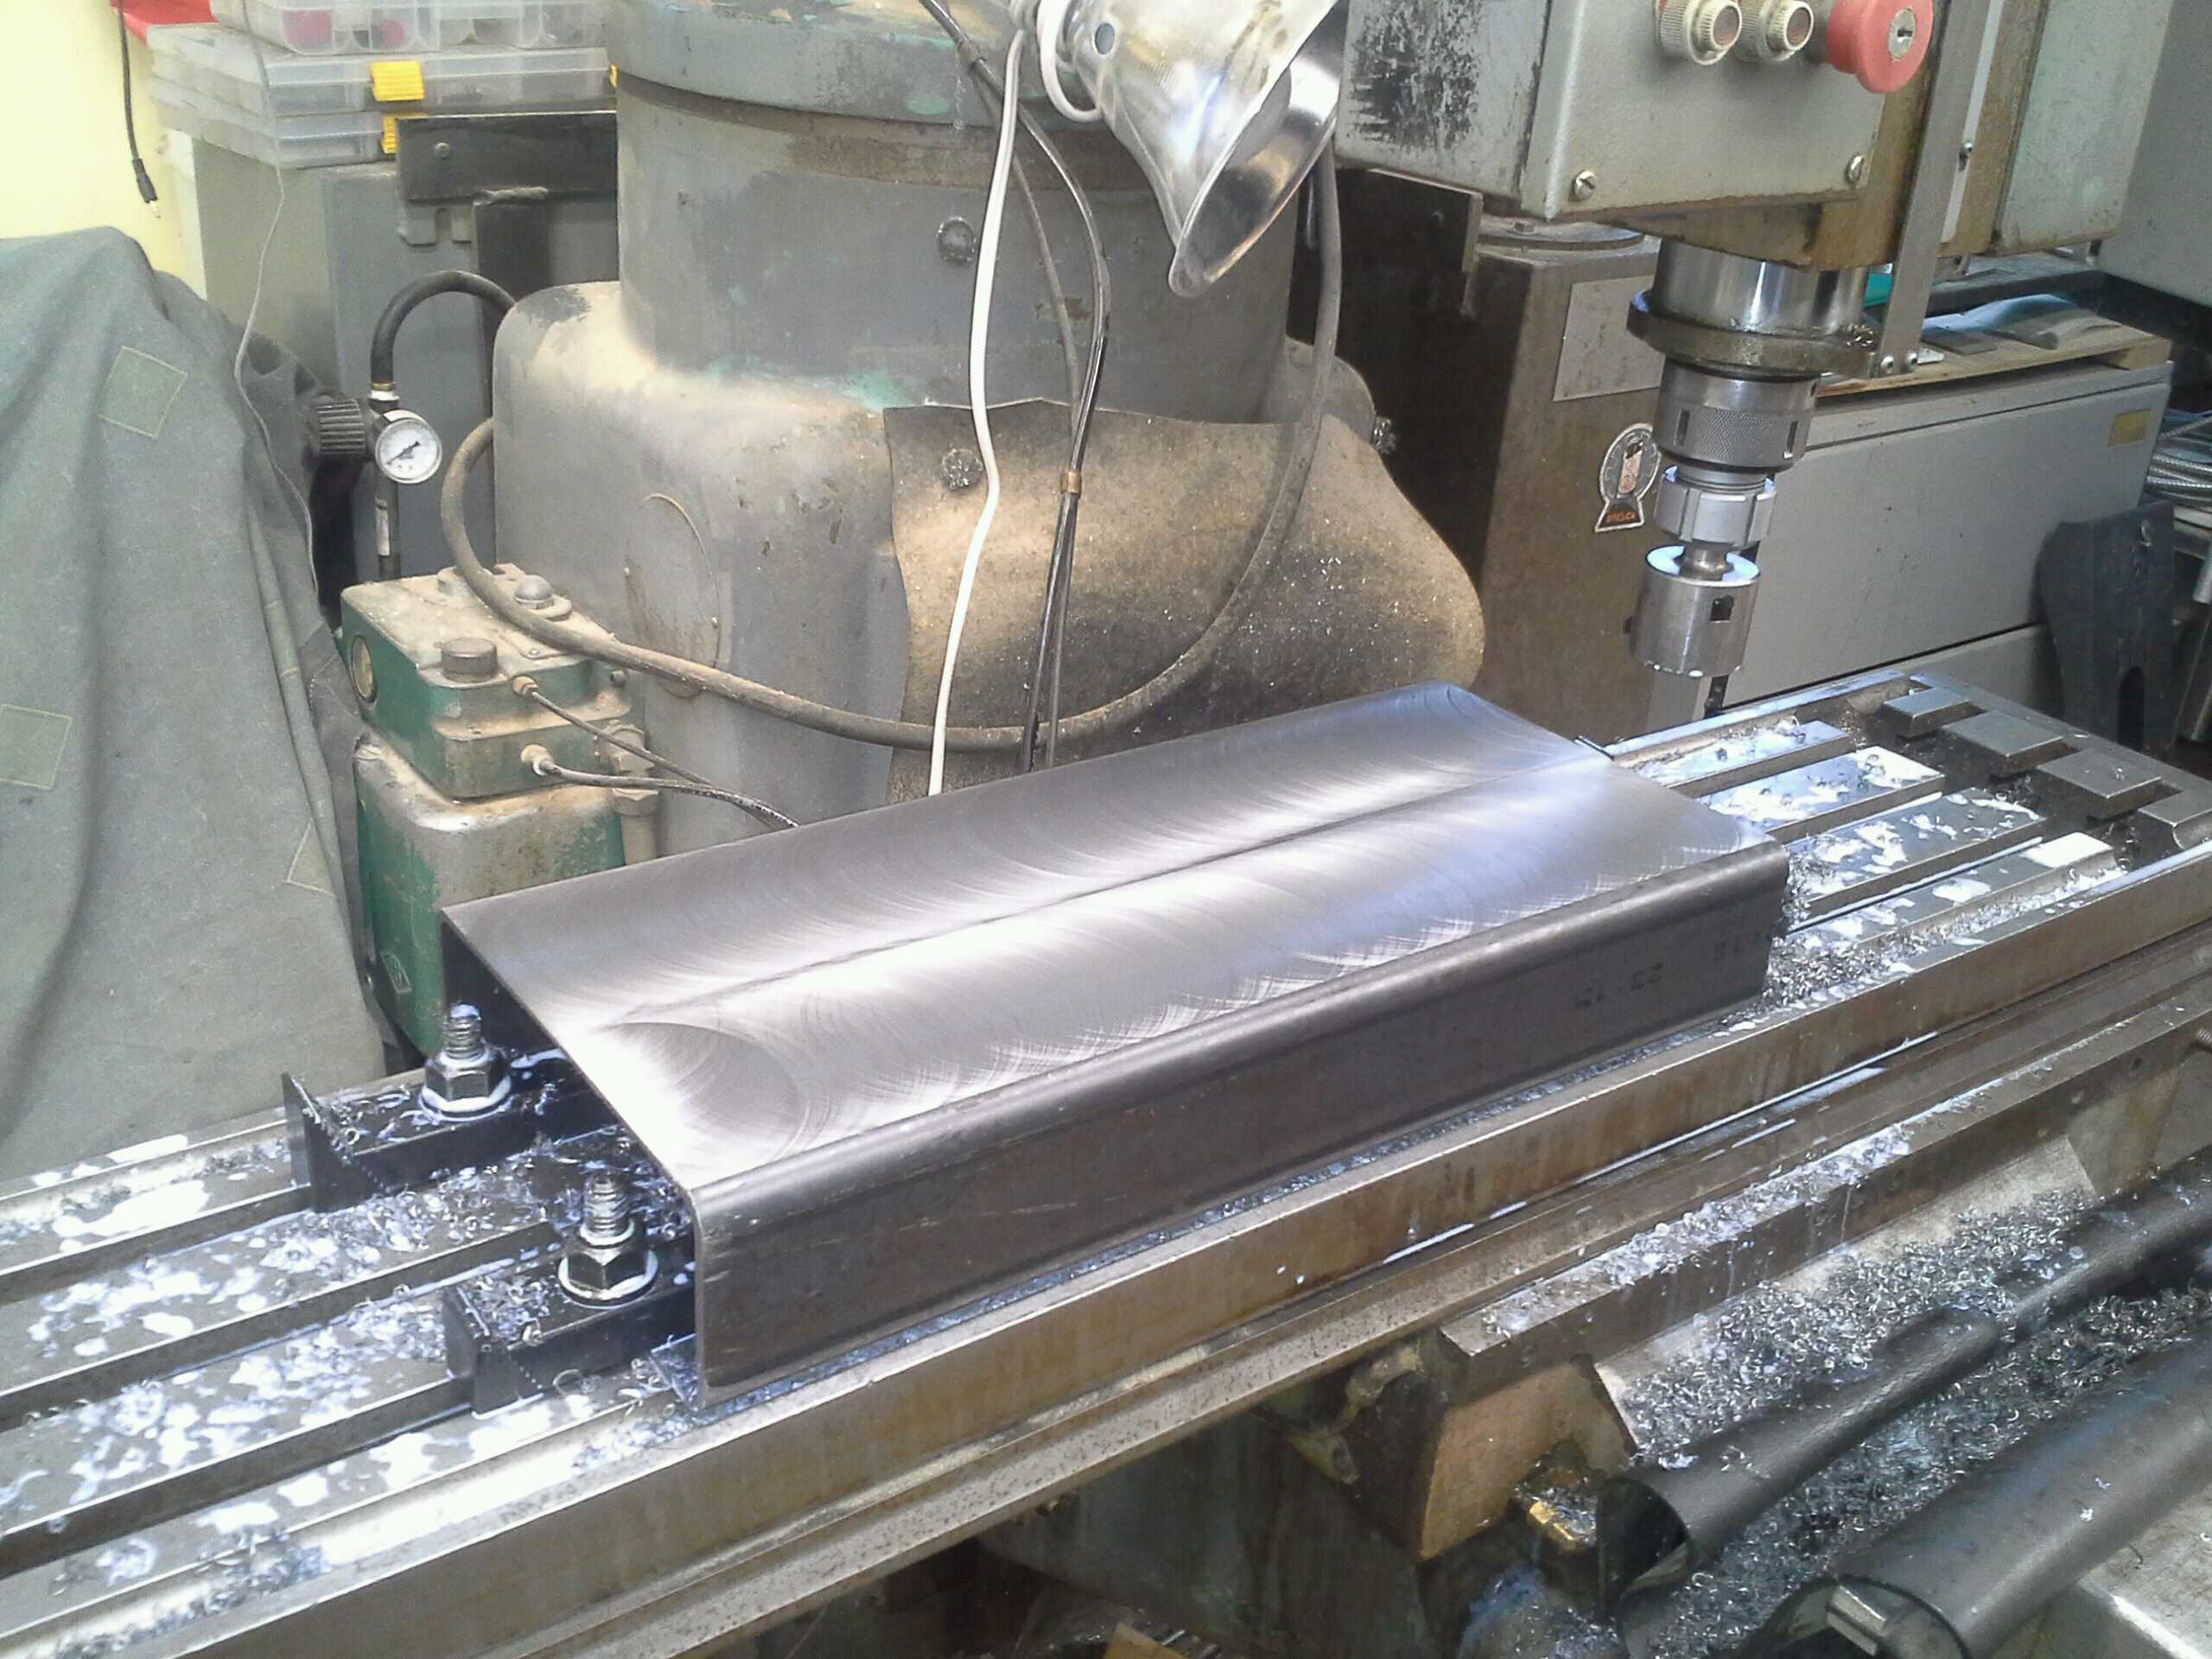 the steel for the frame fully faced, cutting fluid and chip still visible on table